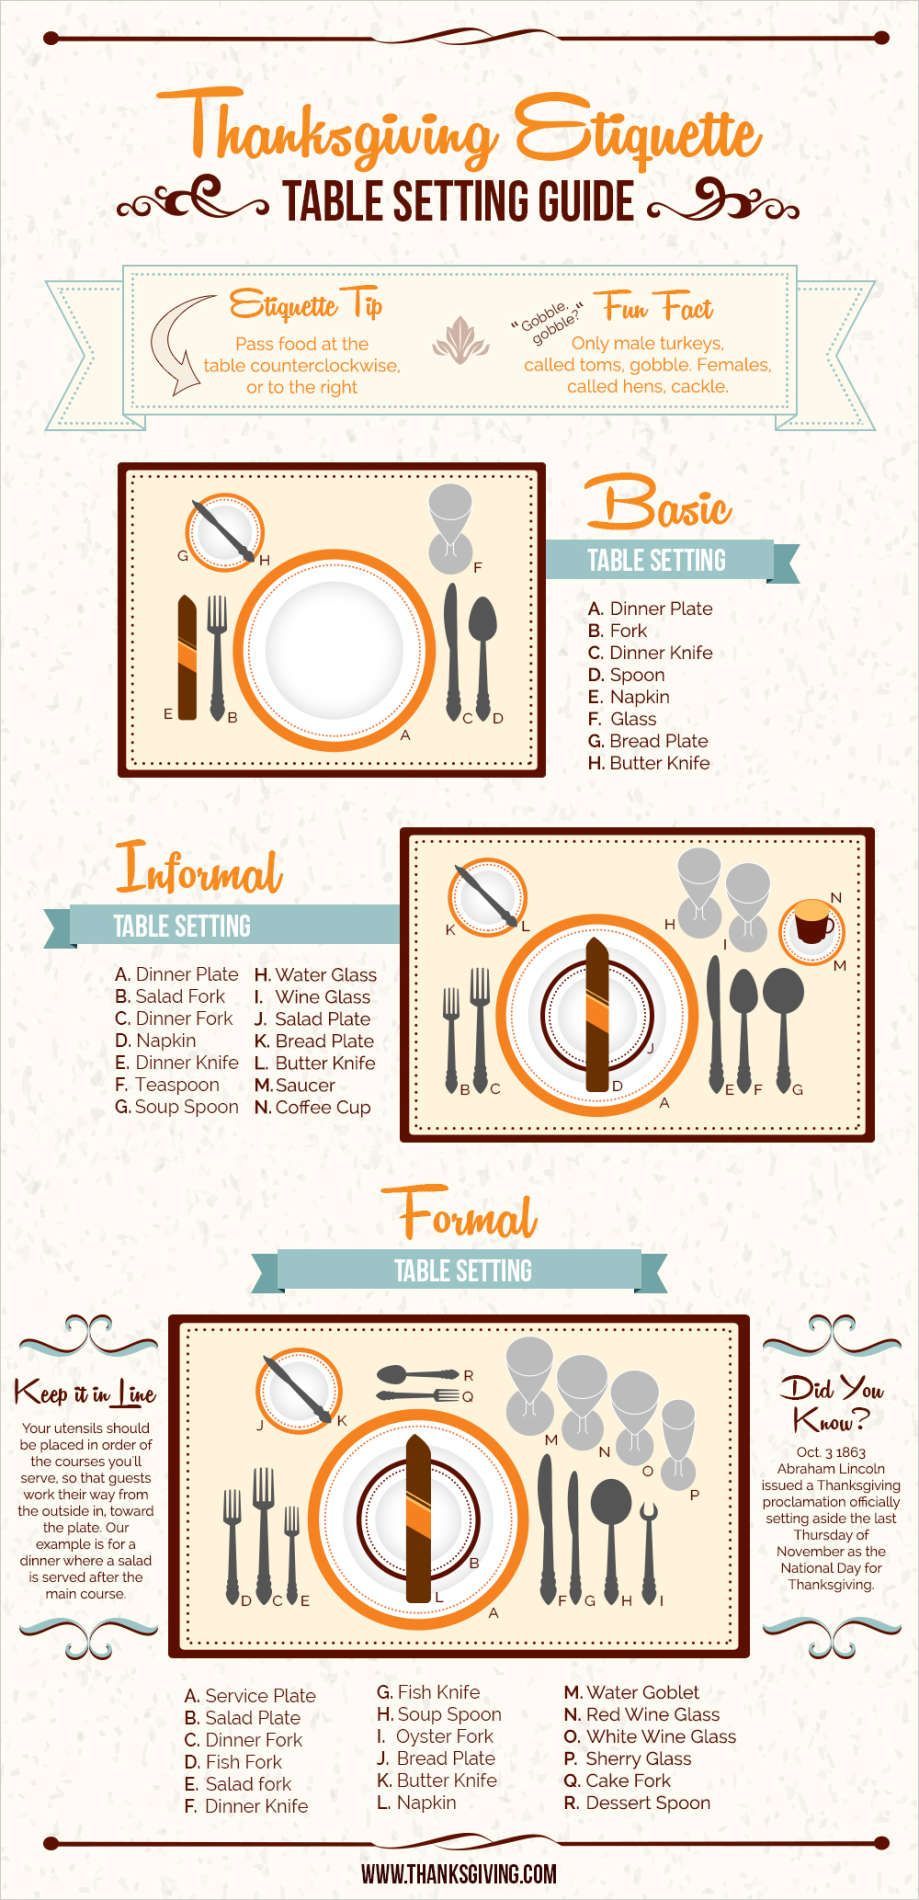 Thanksgiving Table Setting Guide